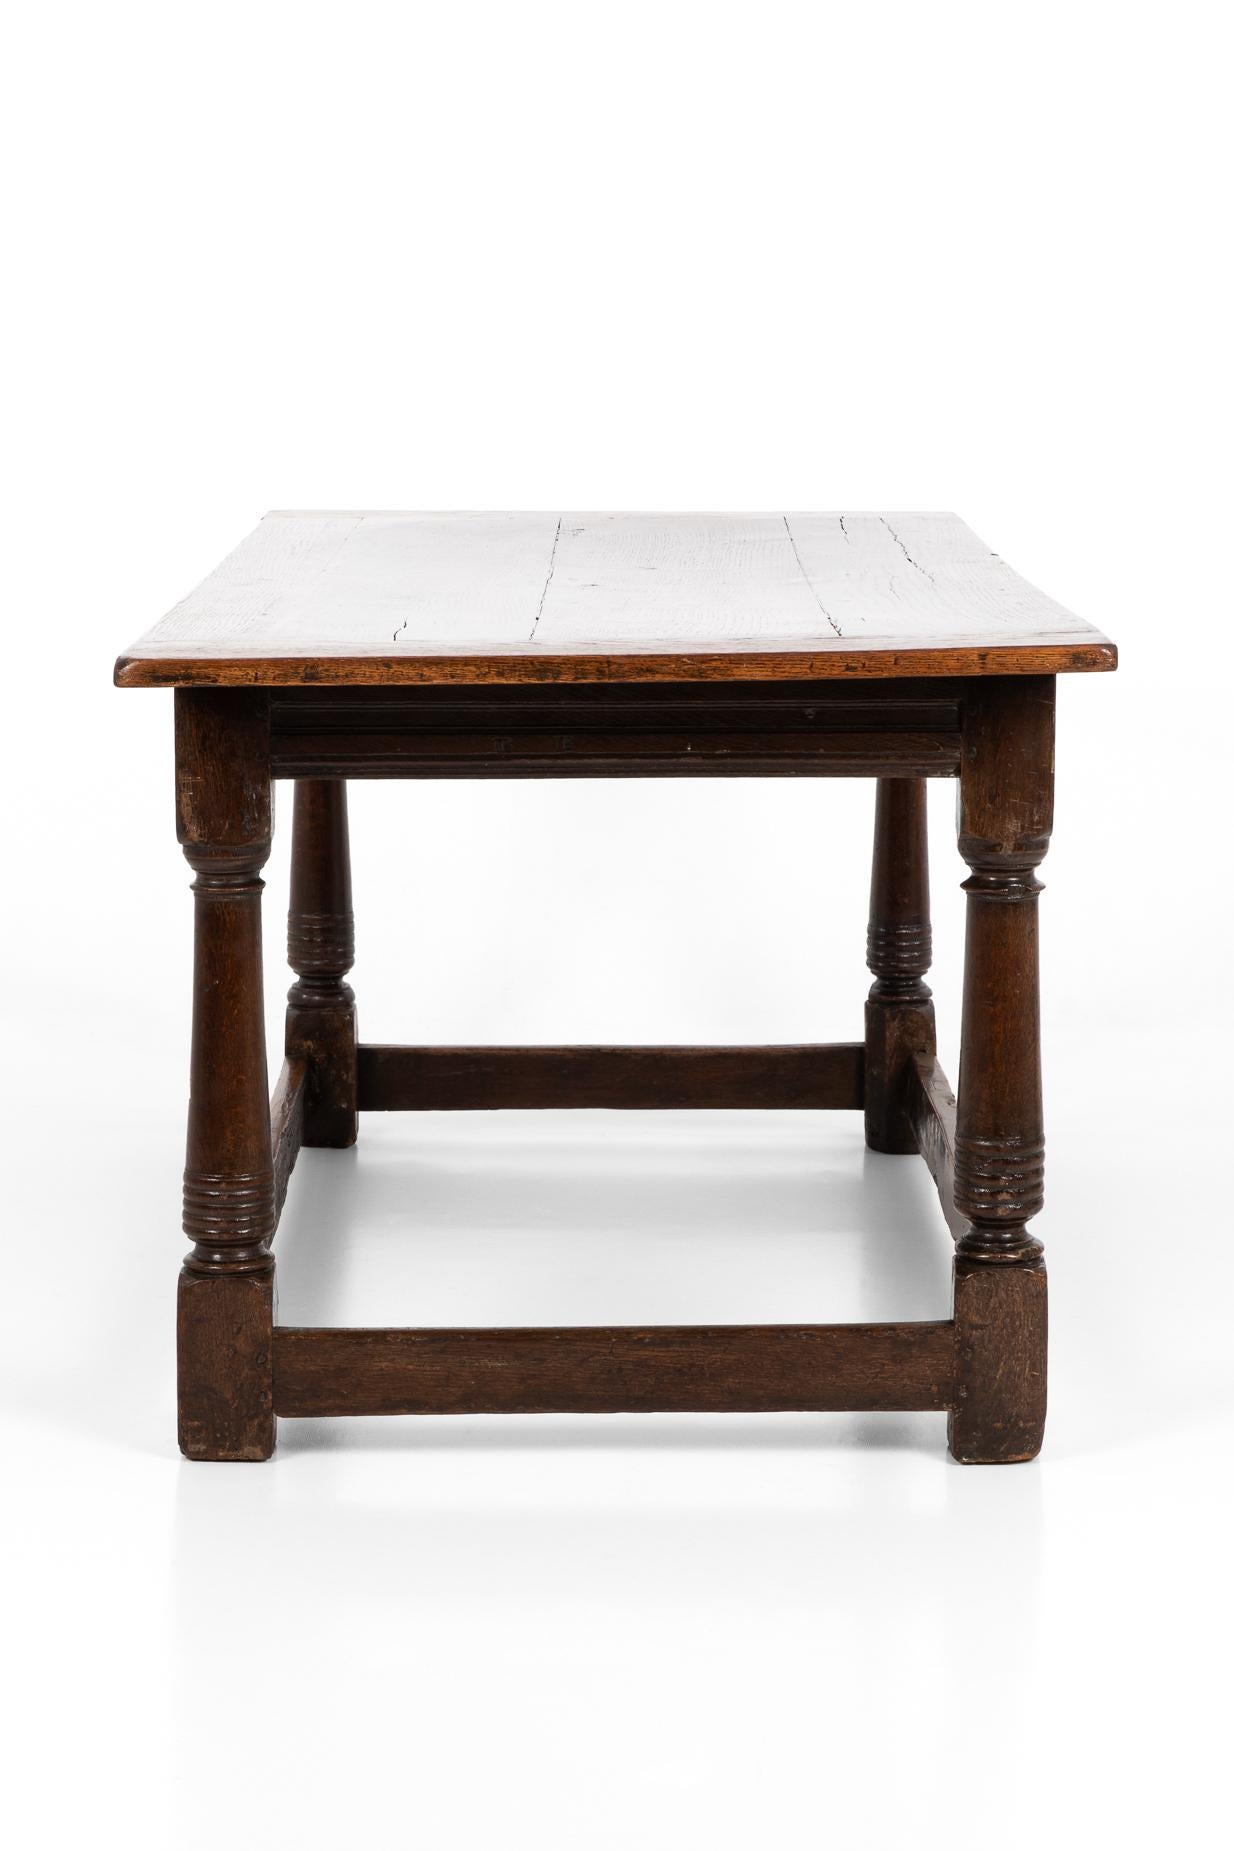 George II 18th Century Oak Refectory Table, circa 1750 For Sale